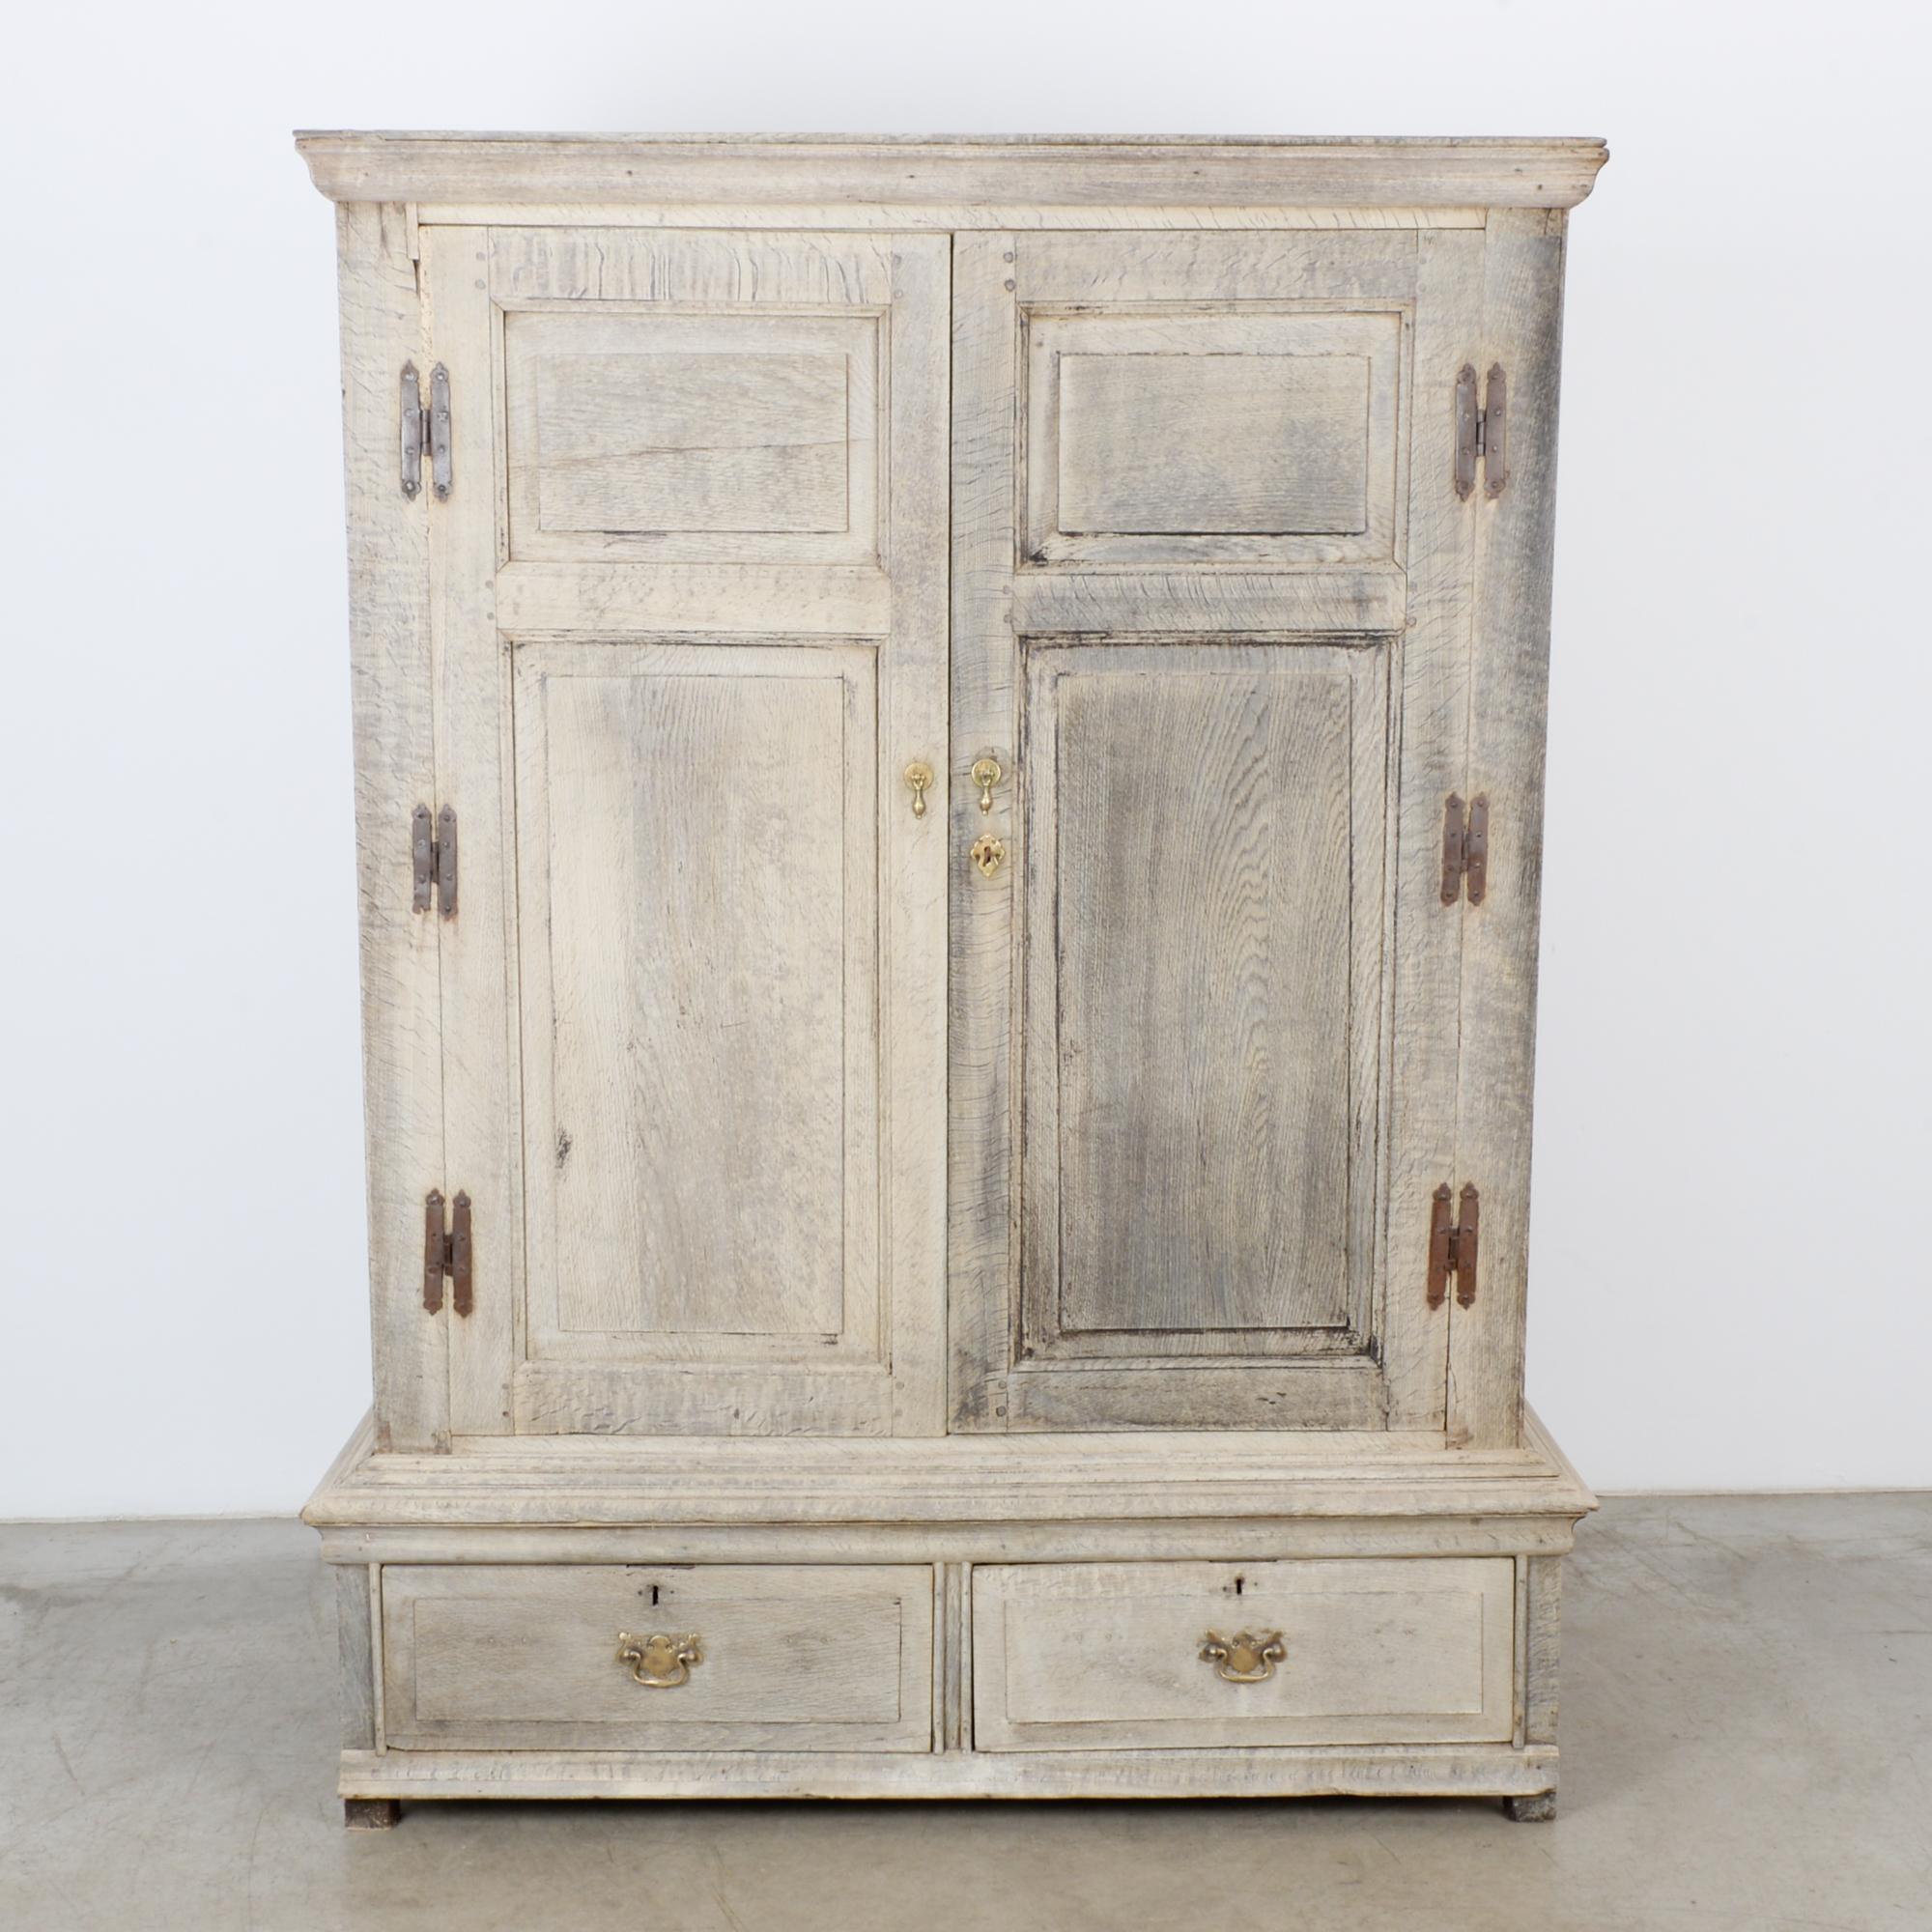 A bleached oak armoire from France, circa 1880. Two paneled doors open onto an interior shelf. Below, two drawers pull out with gilded handles. The square cabinet is enhanced by original details: butterfly hinges create an attractive border; gilded